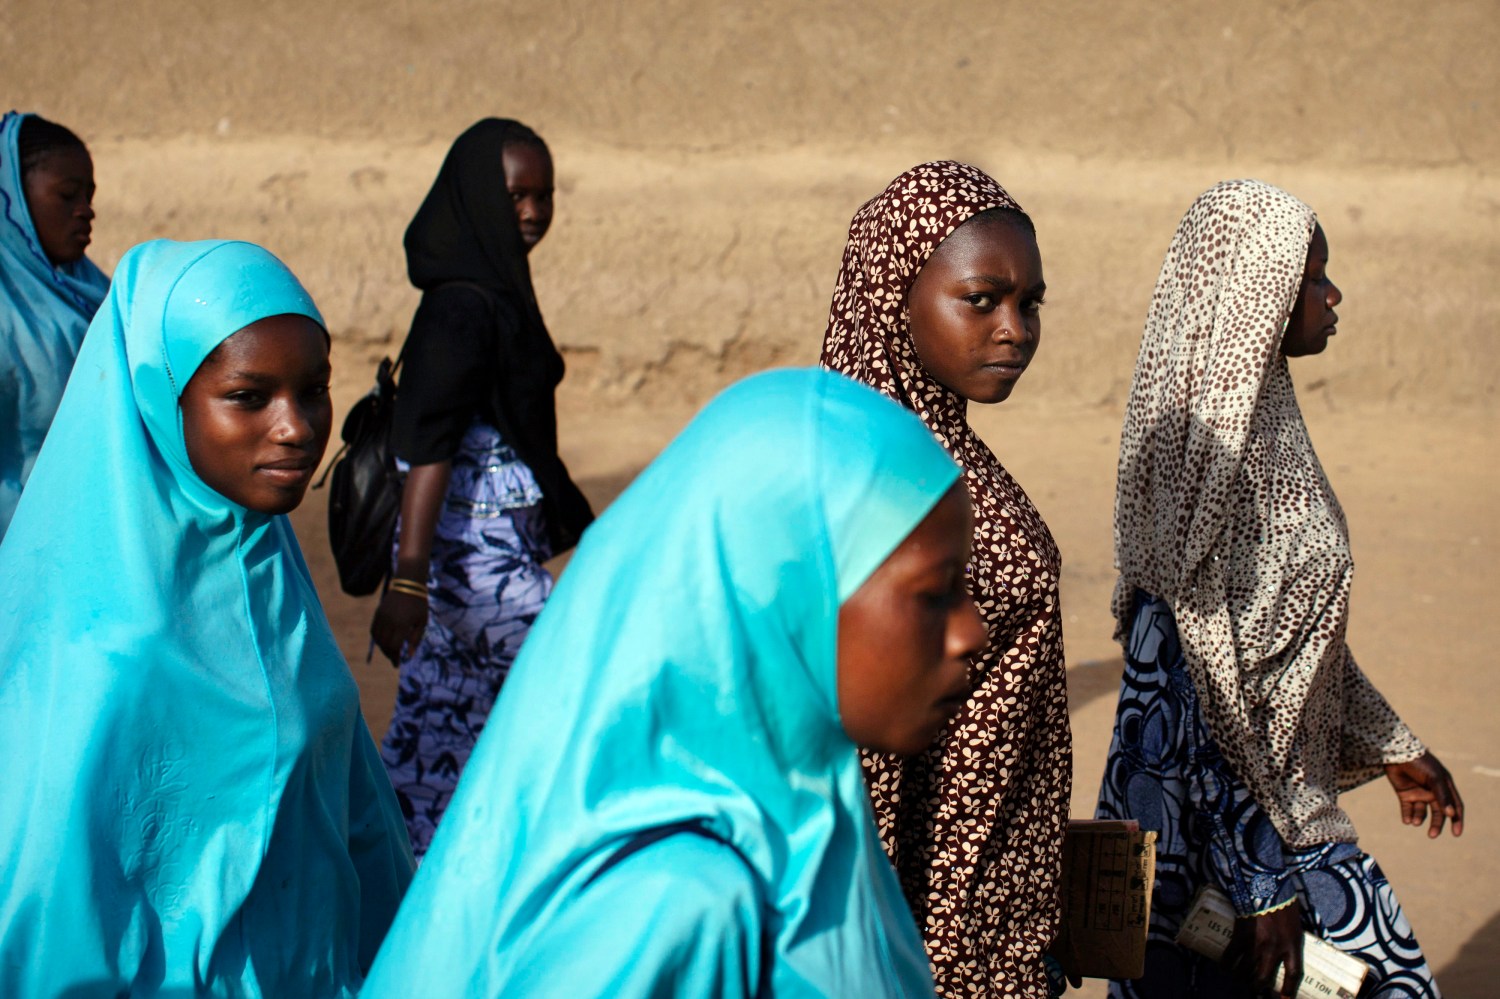 Girls walk to school in Gao, Mali March 7 2013. REUTERS/Joe Penney (MALI - Tags: EDUCATION SOCIETY TPX IMAGES OF THE DAY) - GM1E9371K9V01